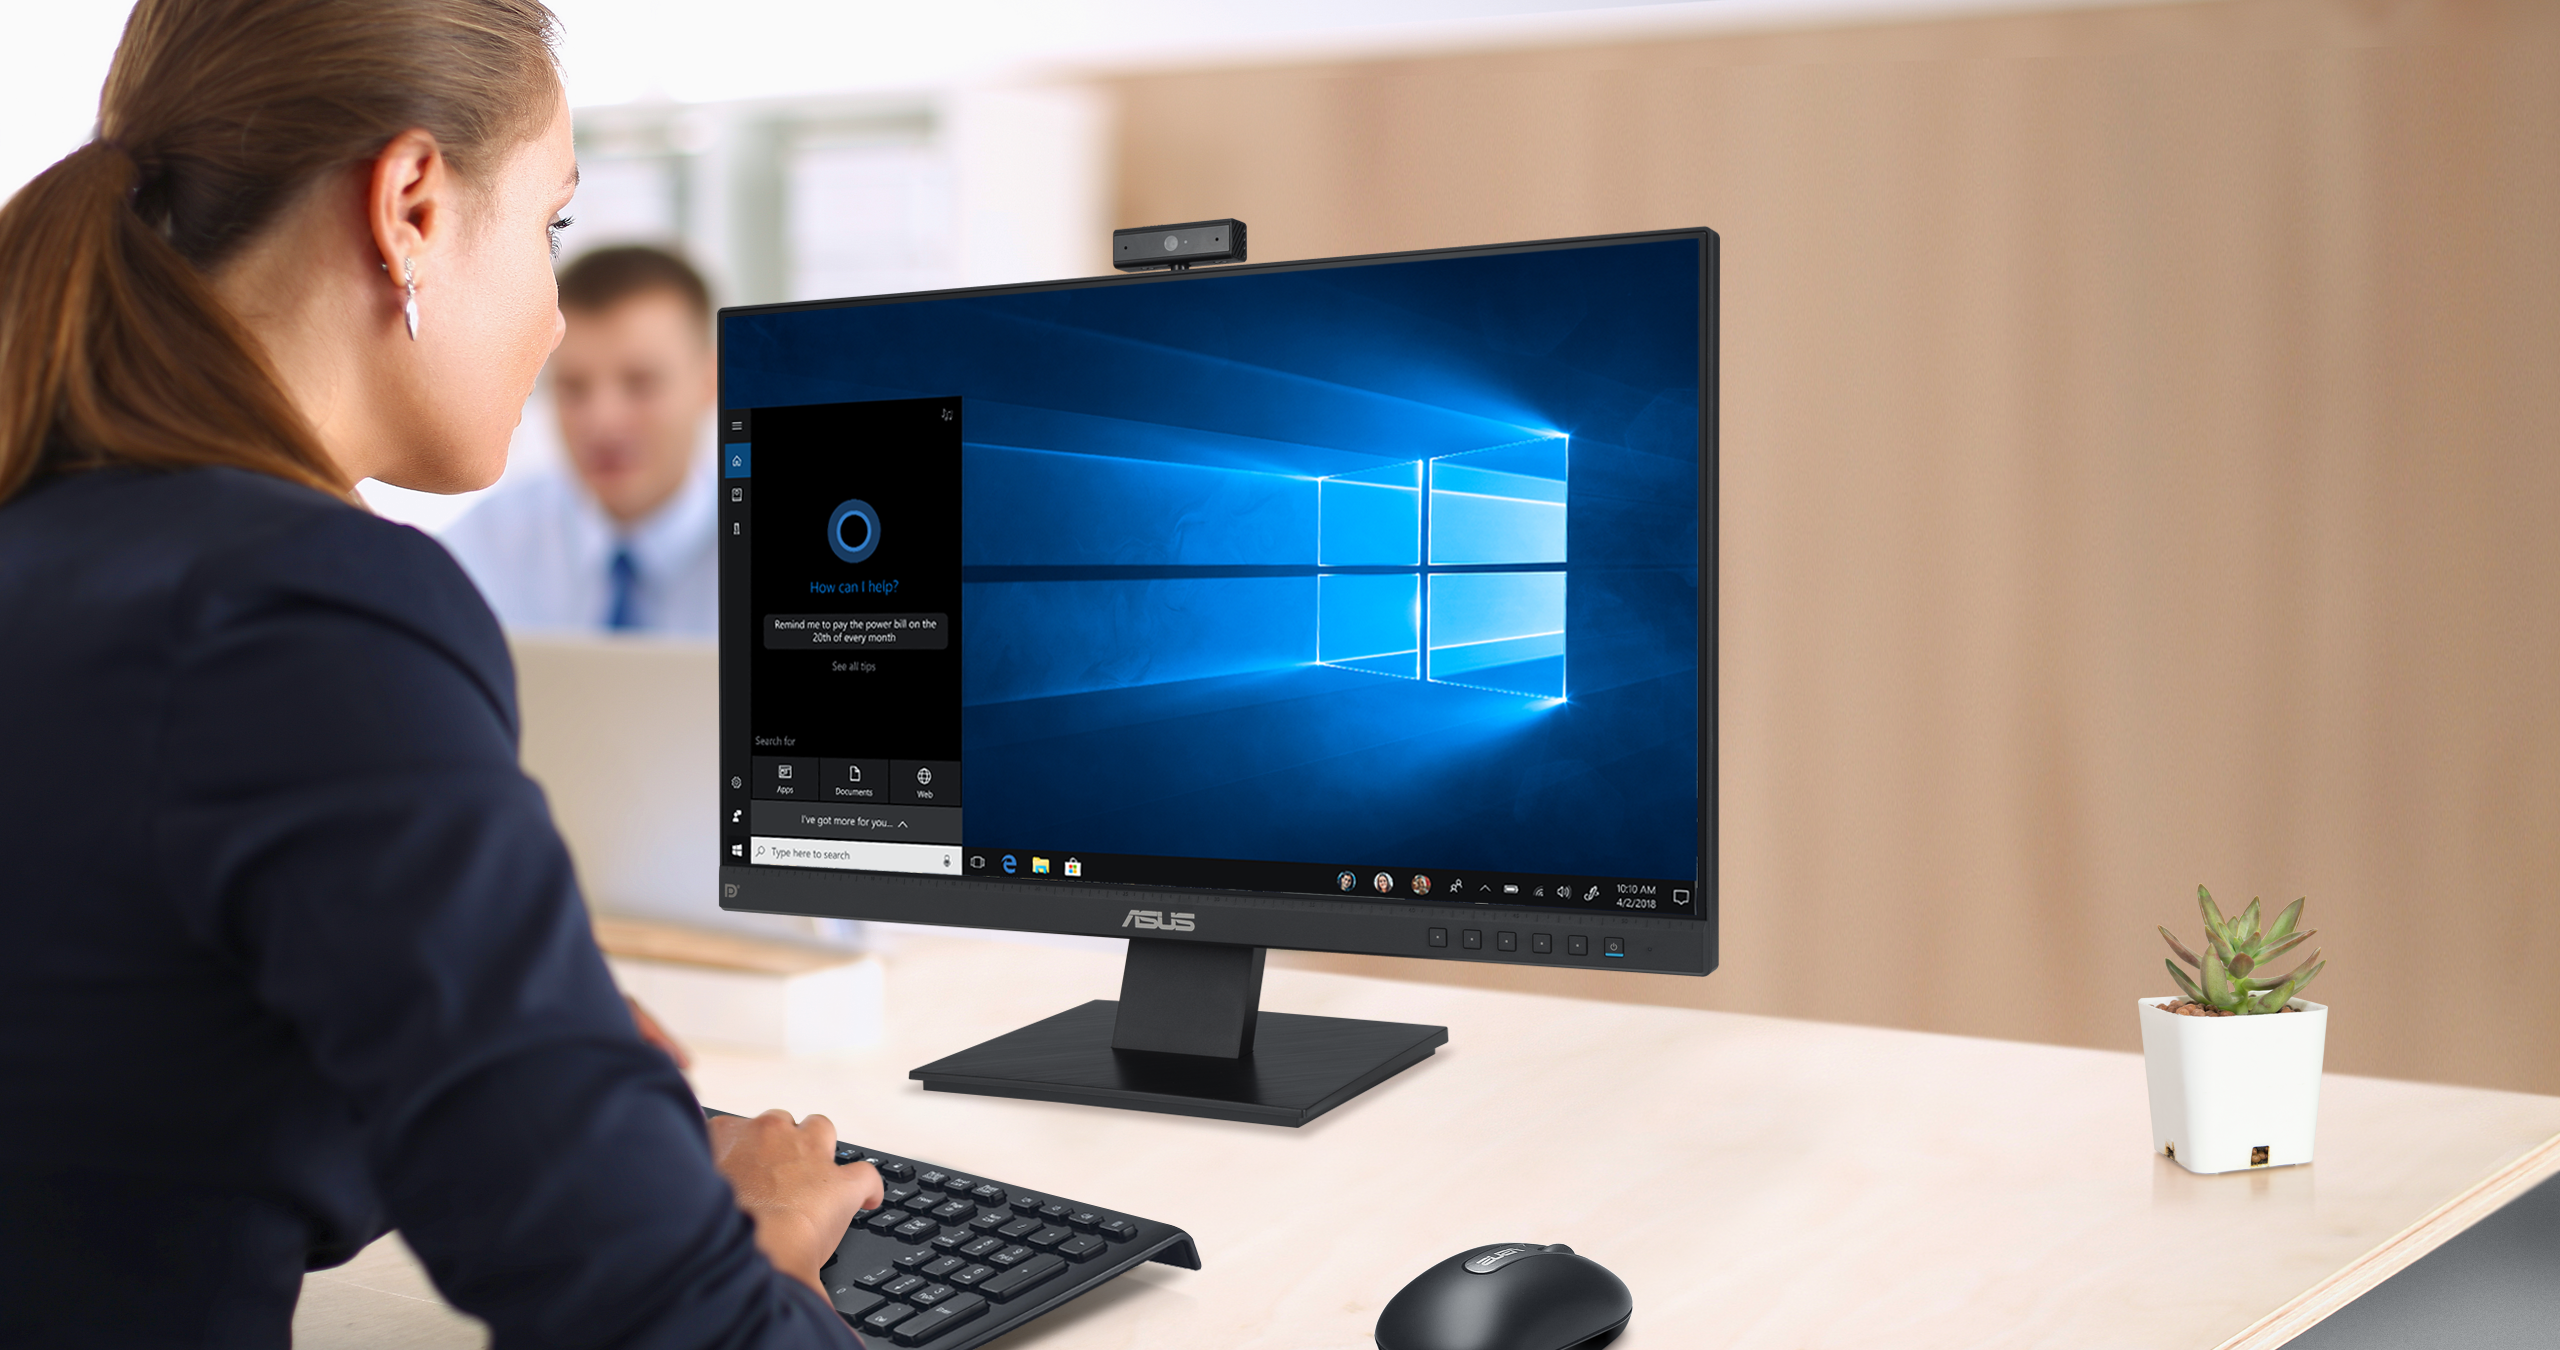 BE24DQLB's beam-forming microphone array separates speech from background noise, so it's perfect for use with Cortana, the Windows 10 smart assistant.